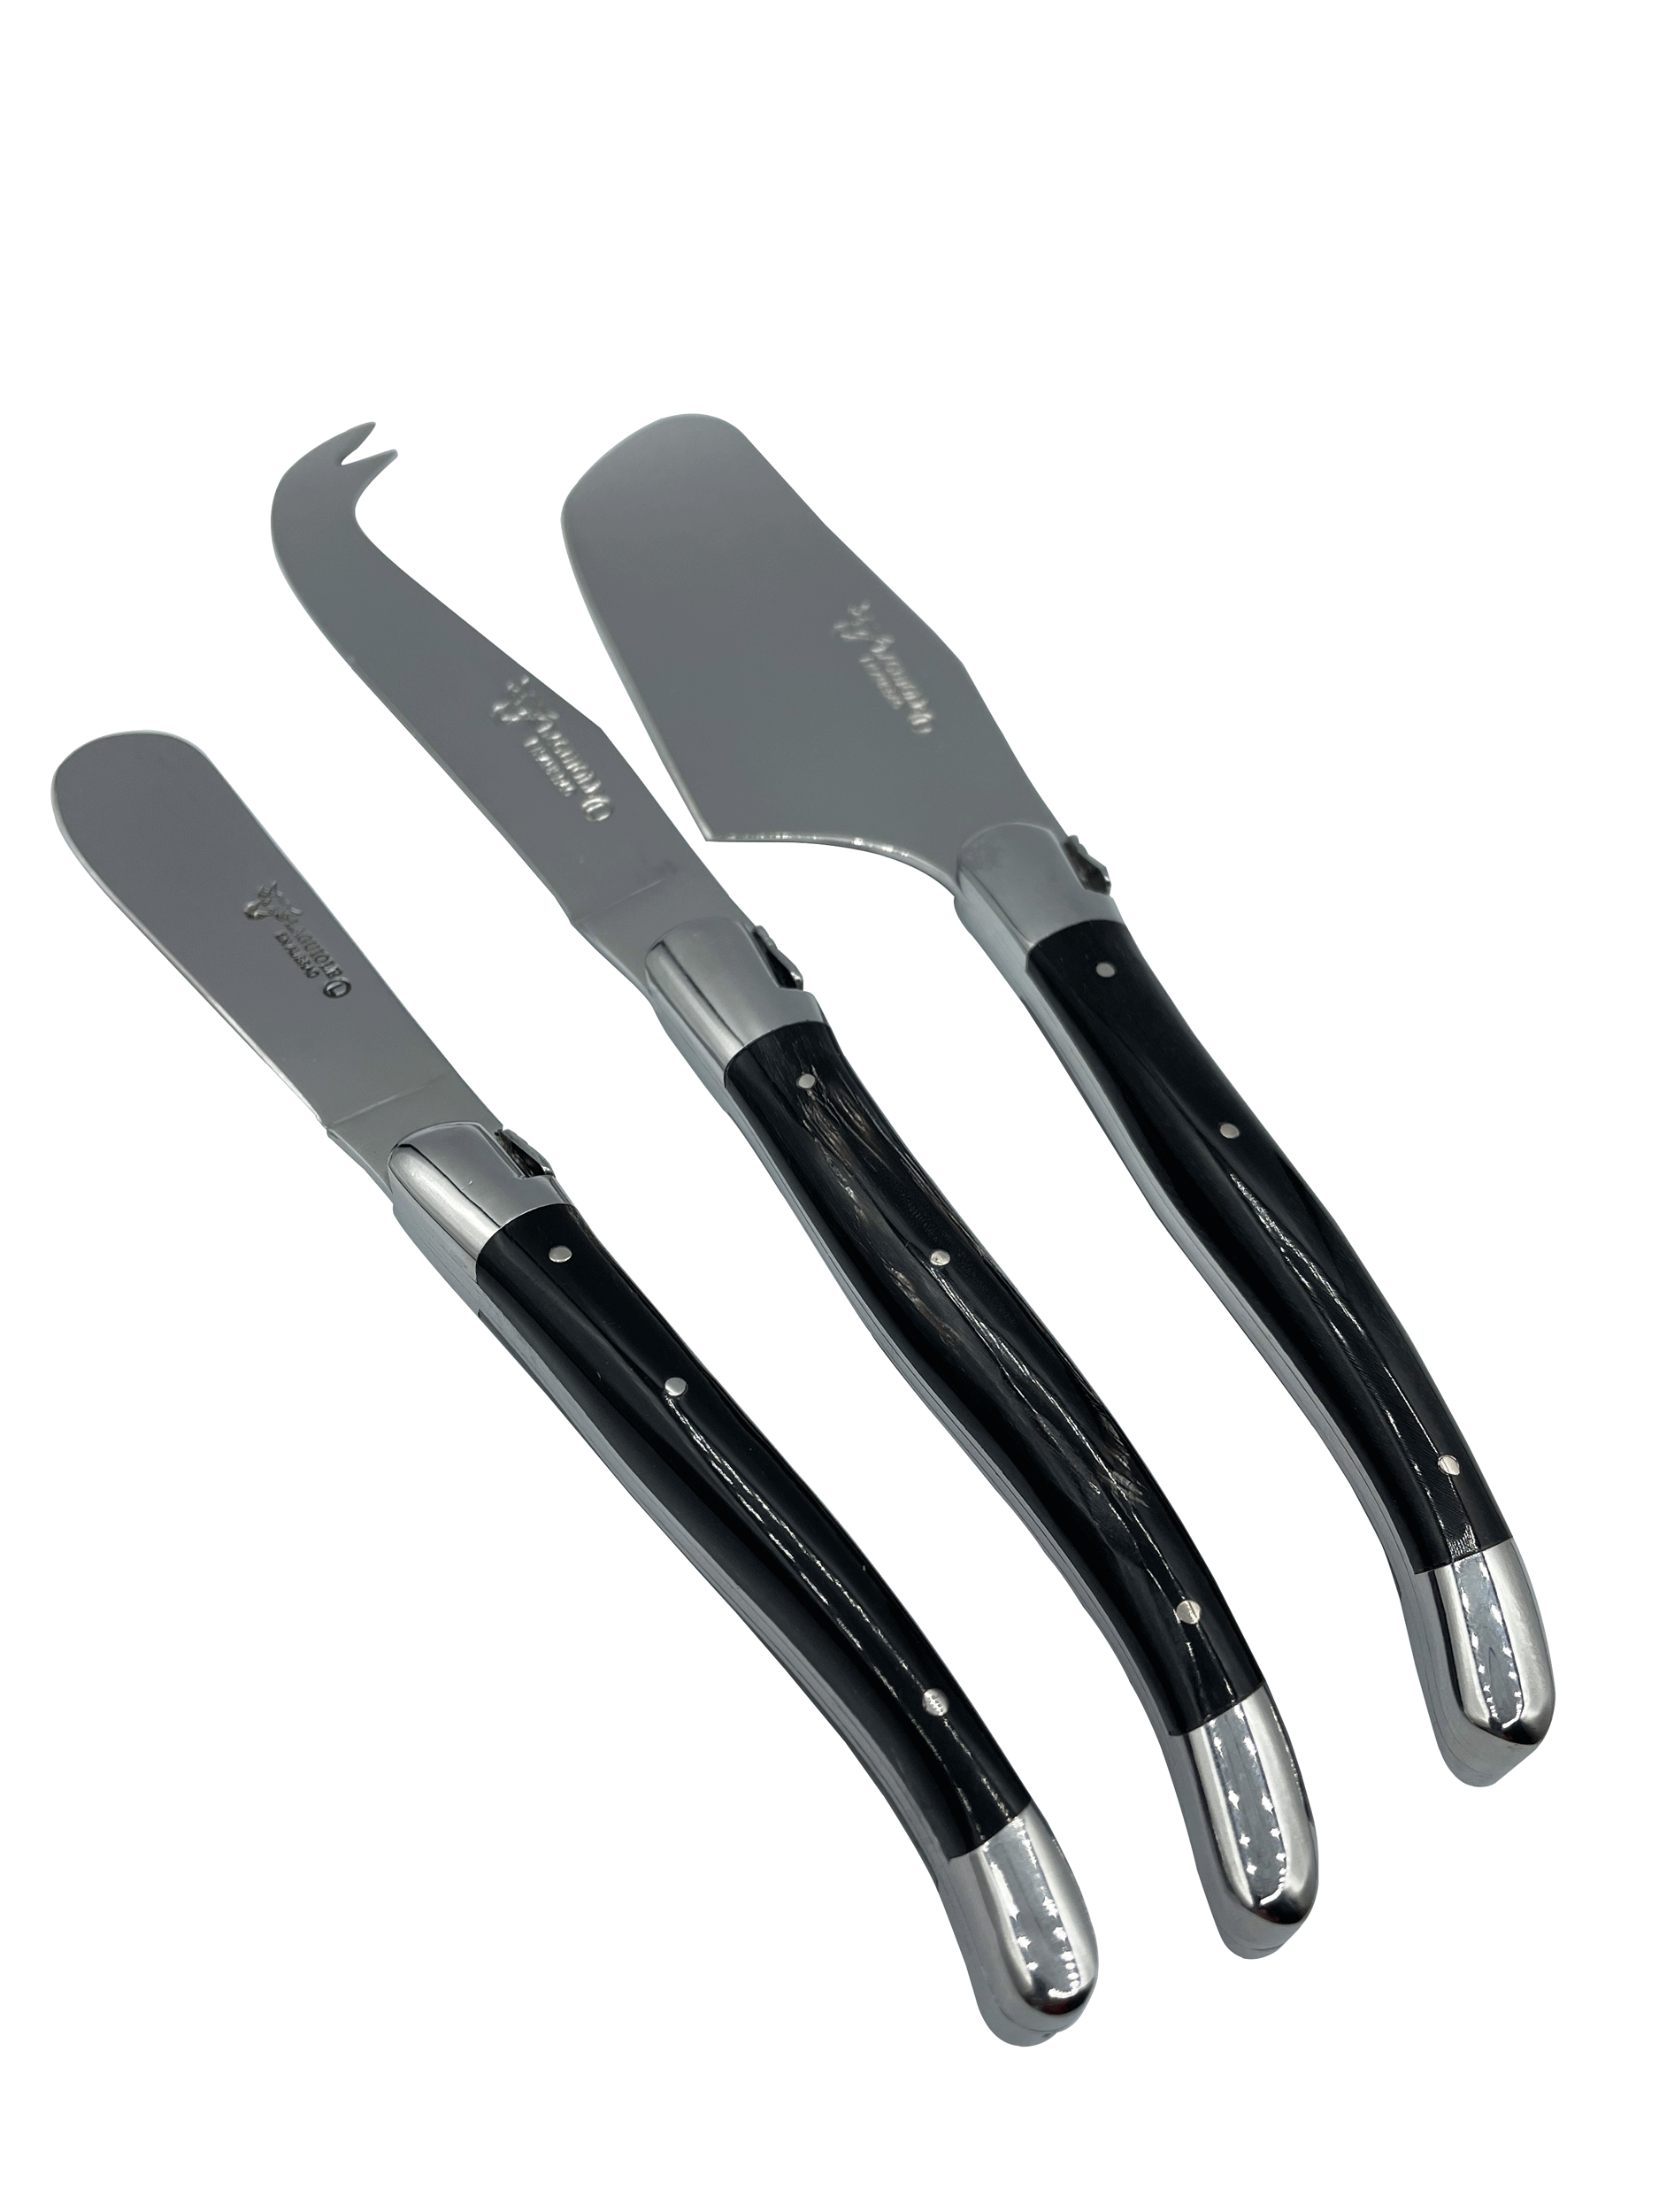 Black & Gold Cheese Knife Set of 3 – Be Home